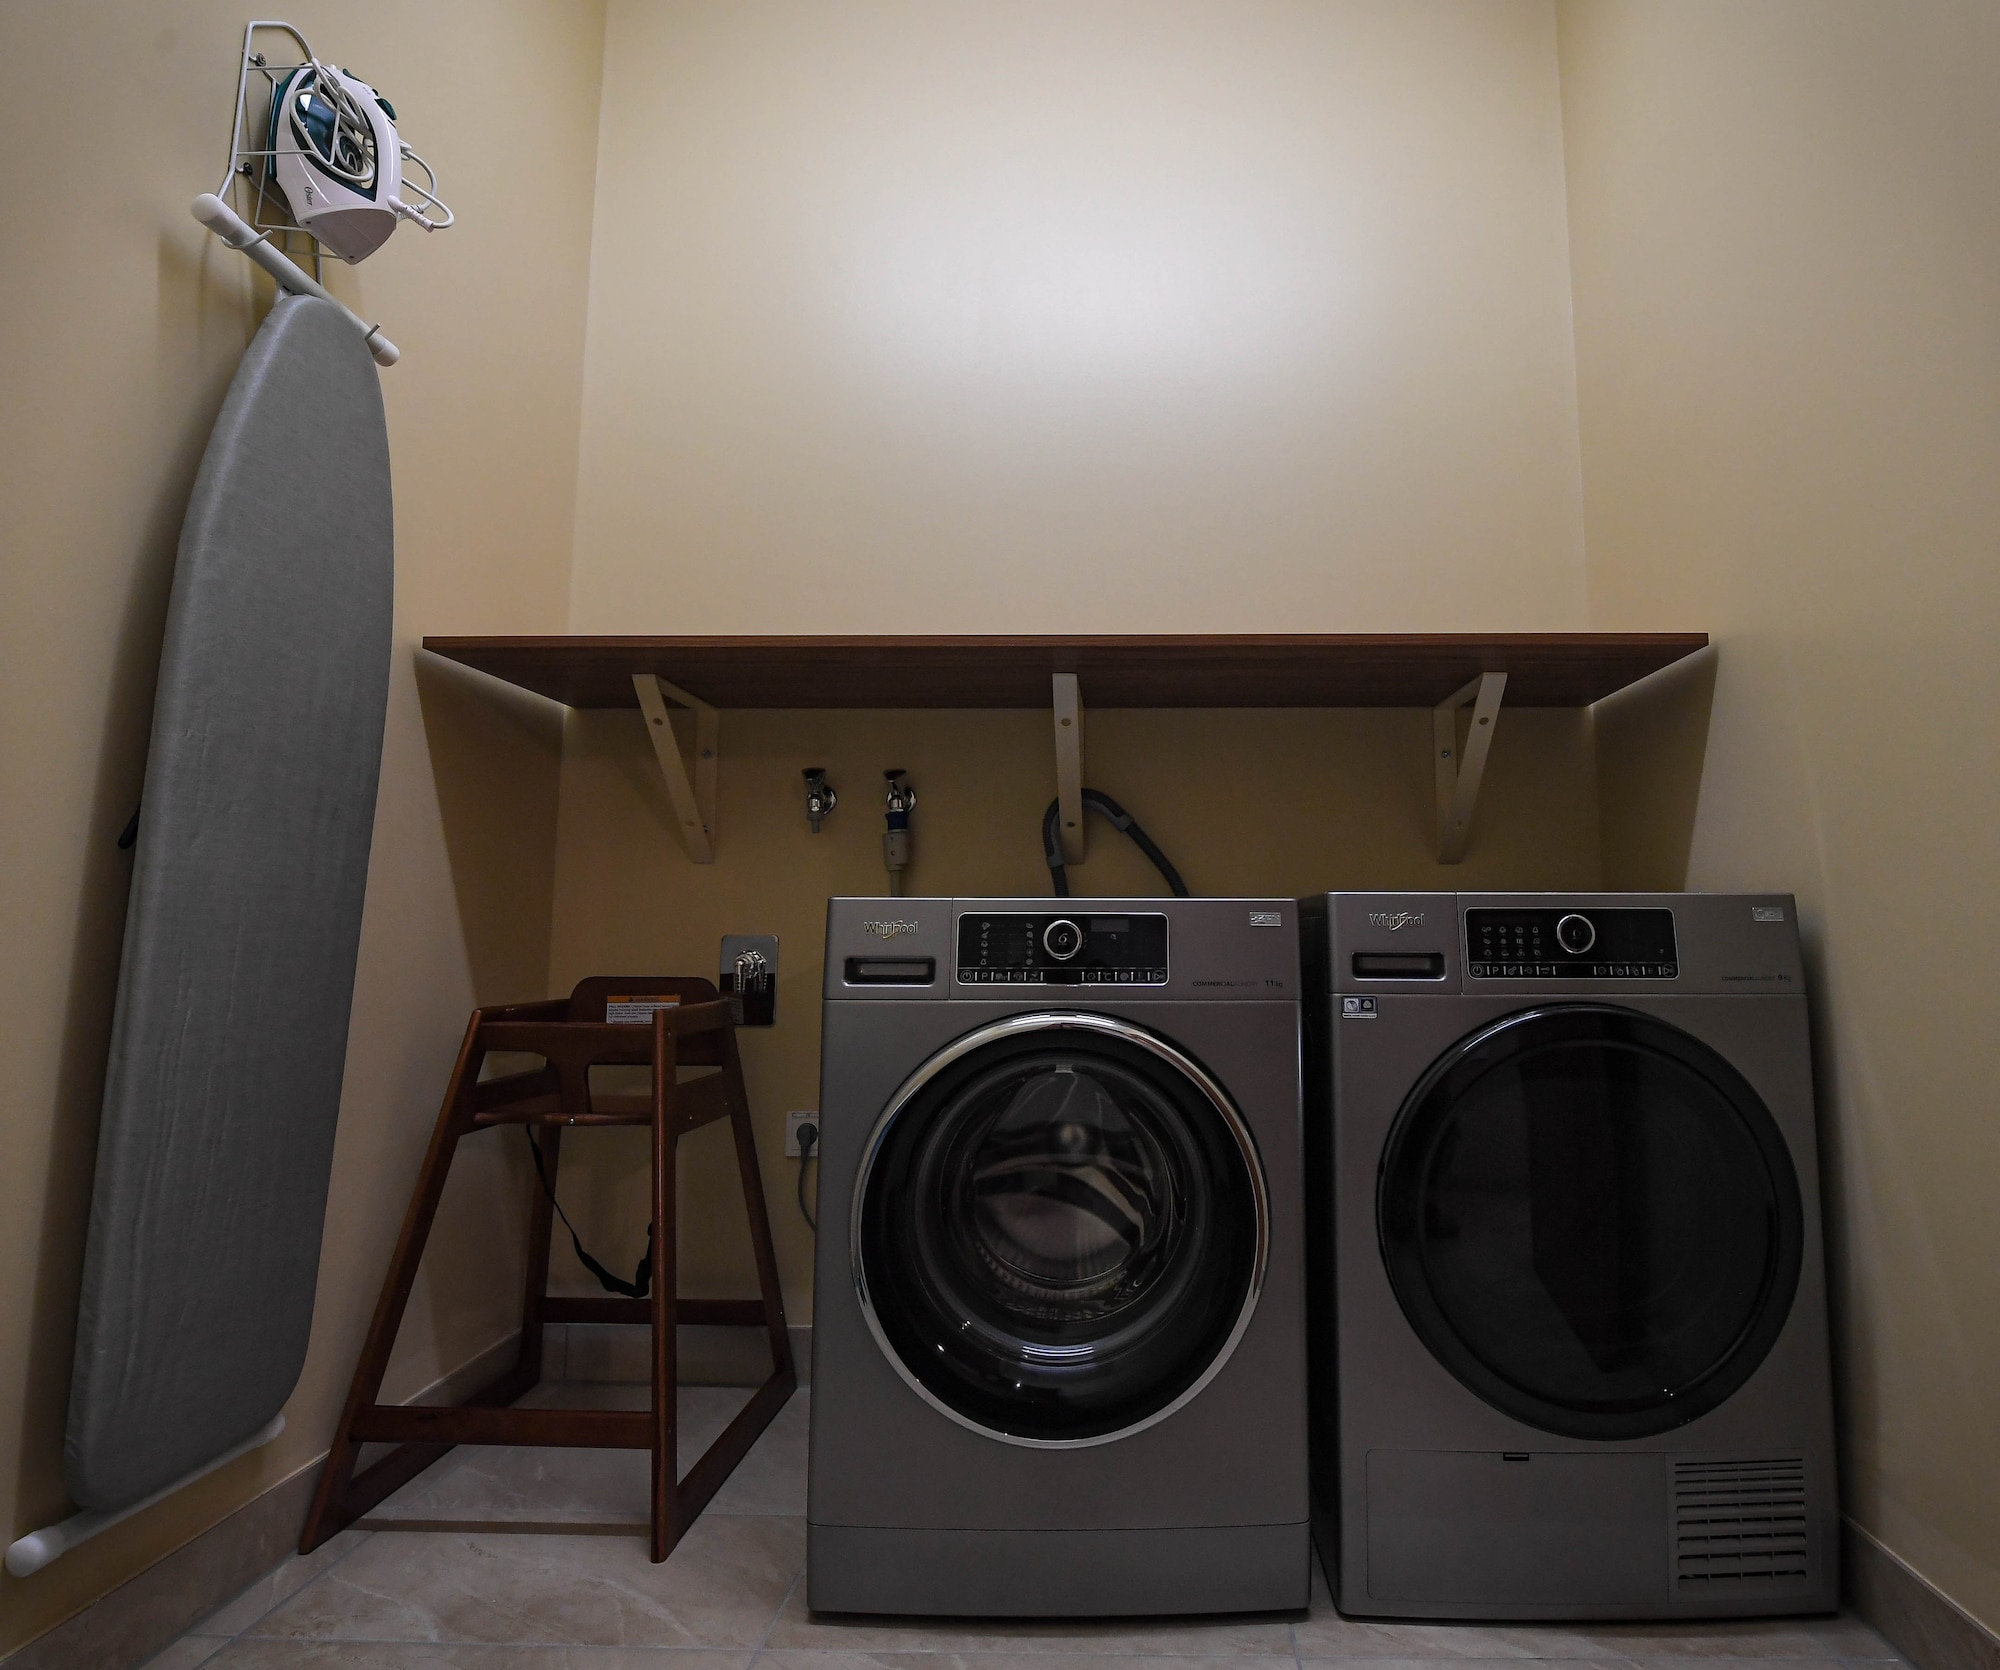 A laundry room furnished with a washer, dryer and ironing board is ready for use at a new temporary lodging facility at Ramstein Air Base, Germany, Feb. 23, 2022. The TLF offers 70 two-bedroom family-units with a fully furnished kitchen, bathroom and underfloor-heating, as well as an elevator. (U.S. Air Force photo by Airman 1st Class Jared Lovett)